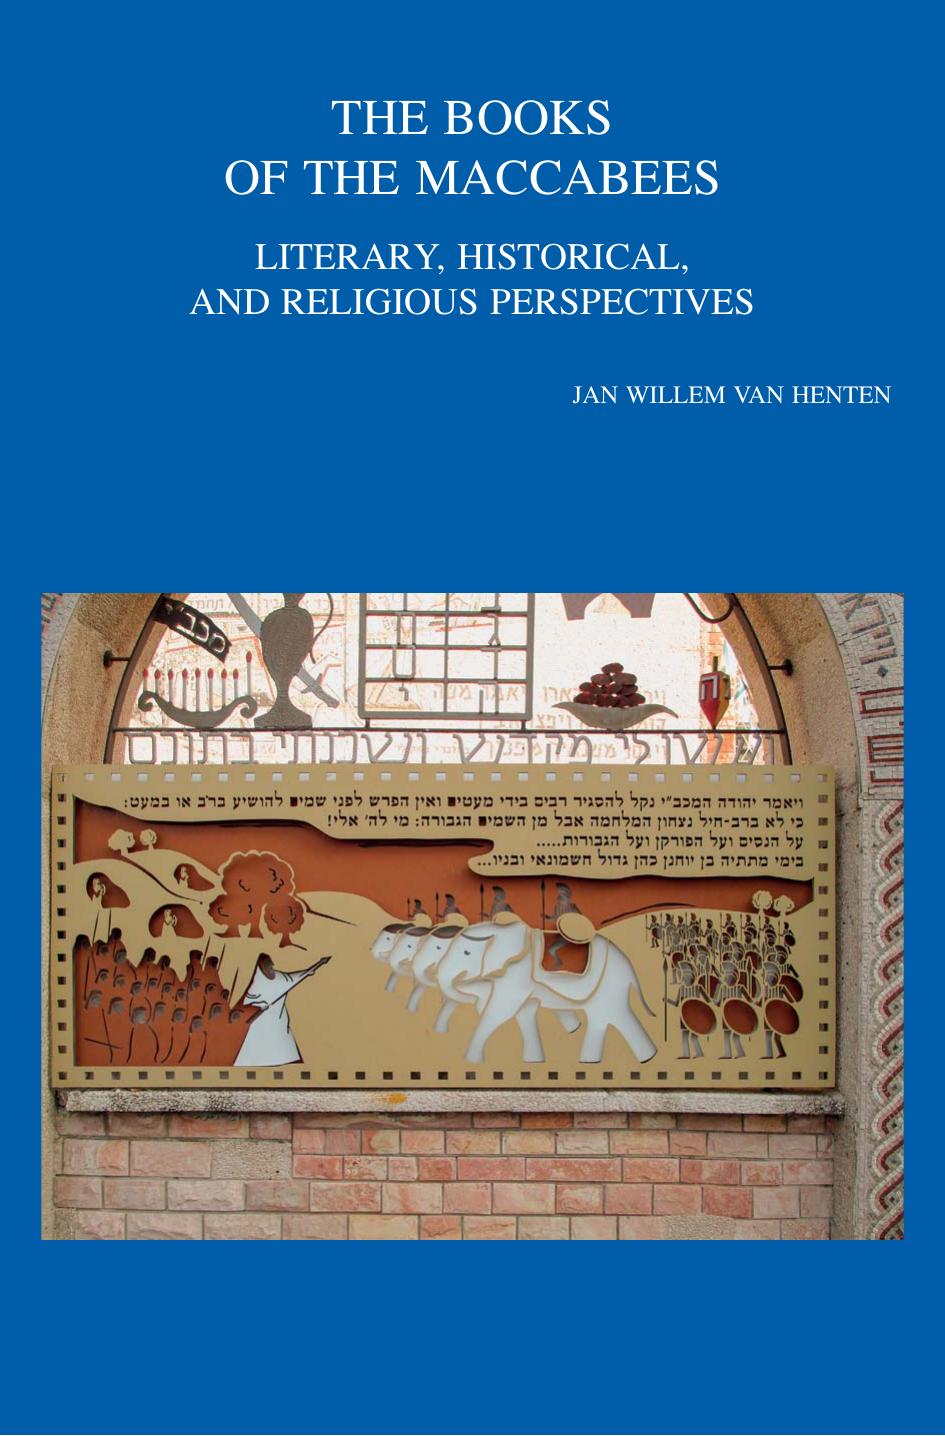 The Books of the Maccabees: Literary, Historical, and Religious Perspectives by J.W. van Henten